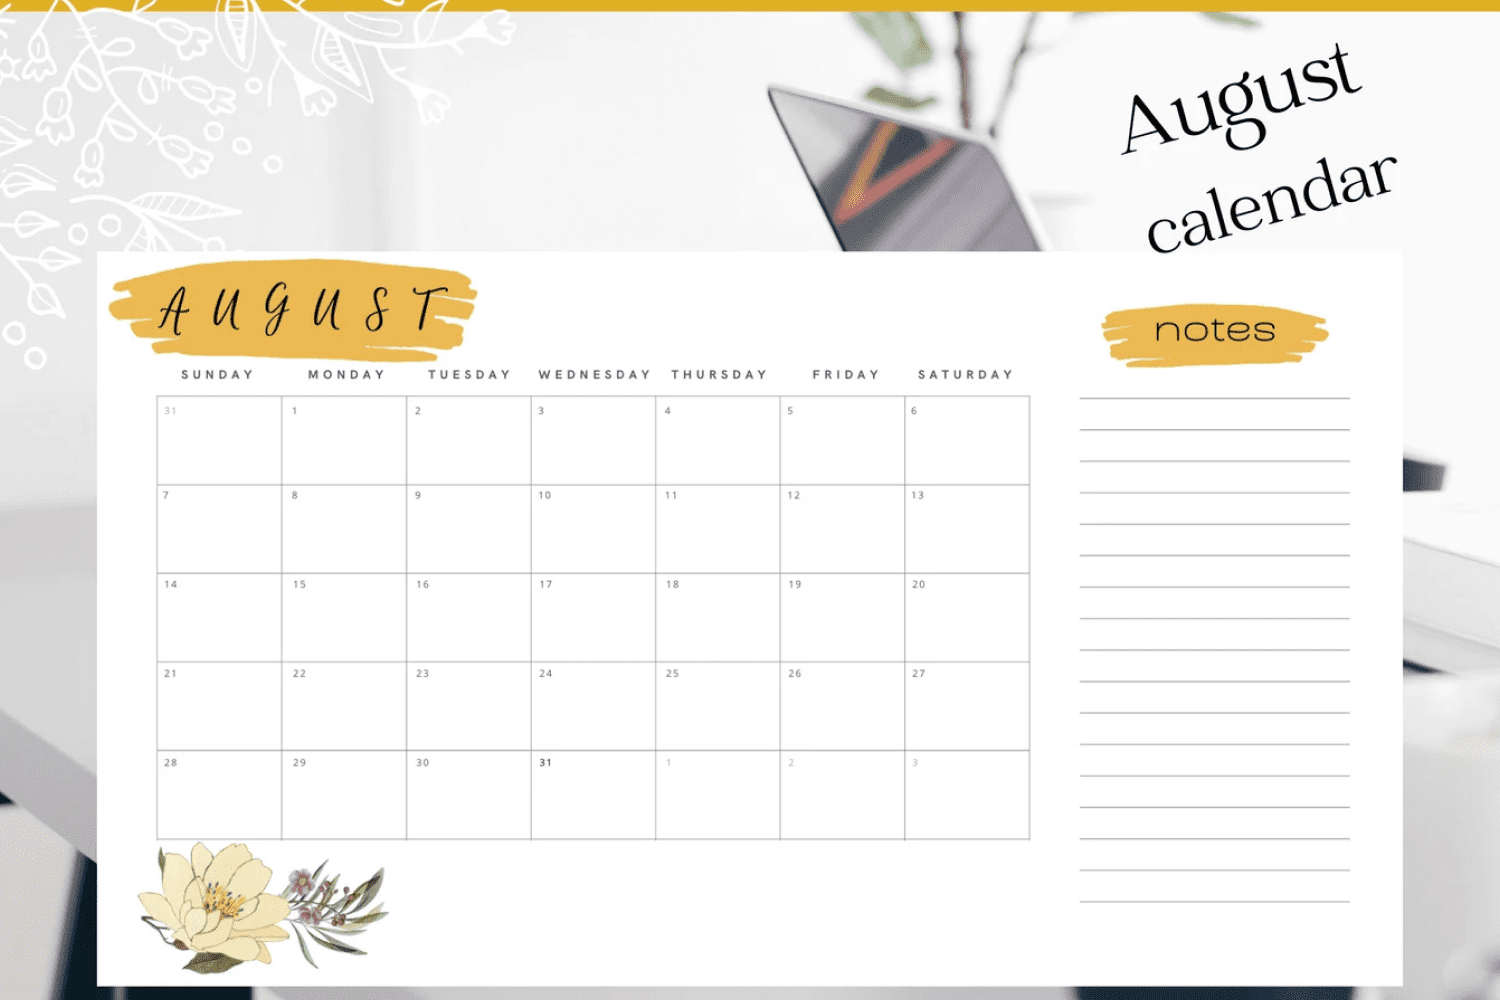 August calendar with notepad page and yellow accents.